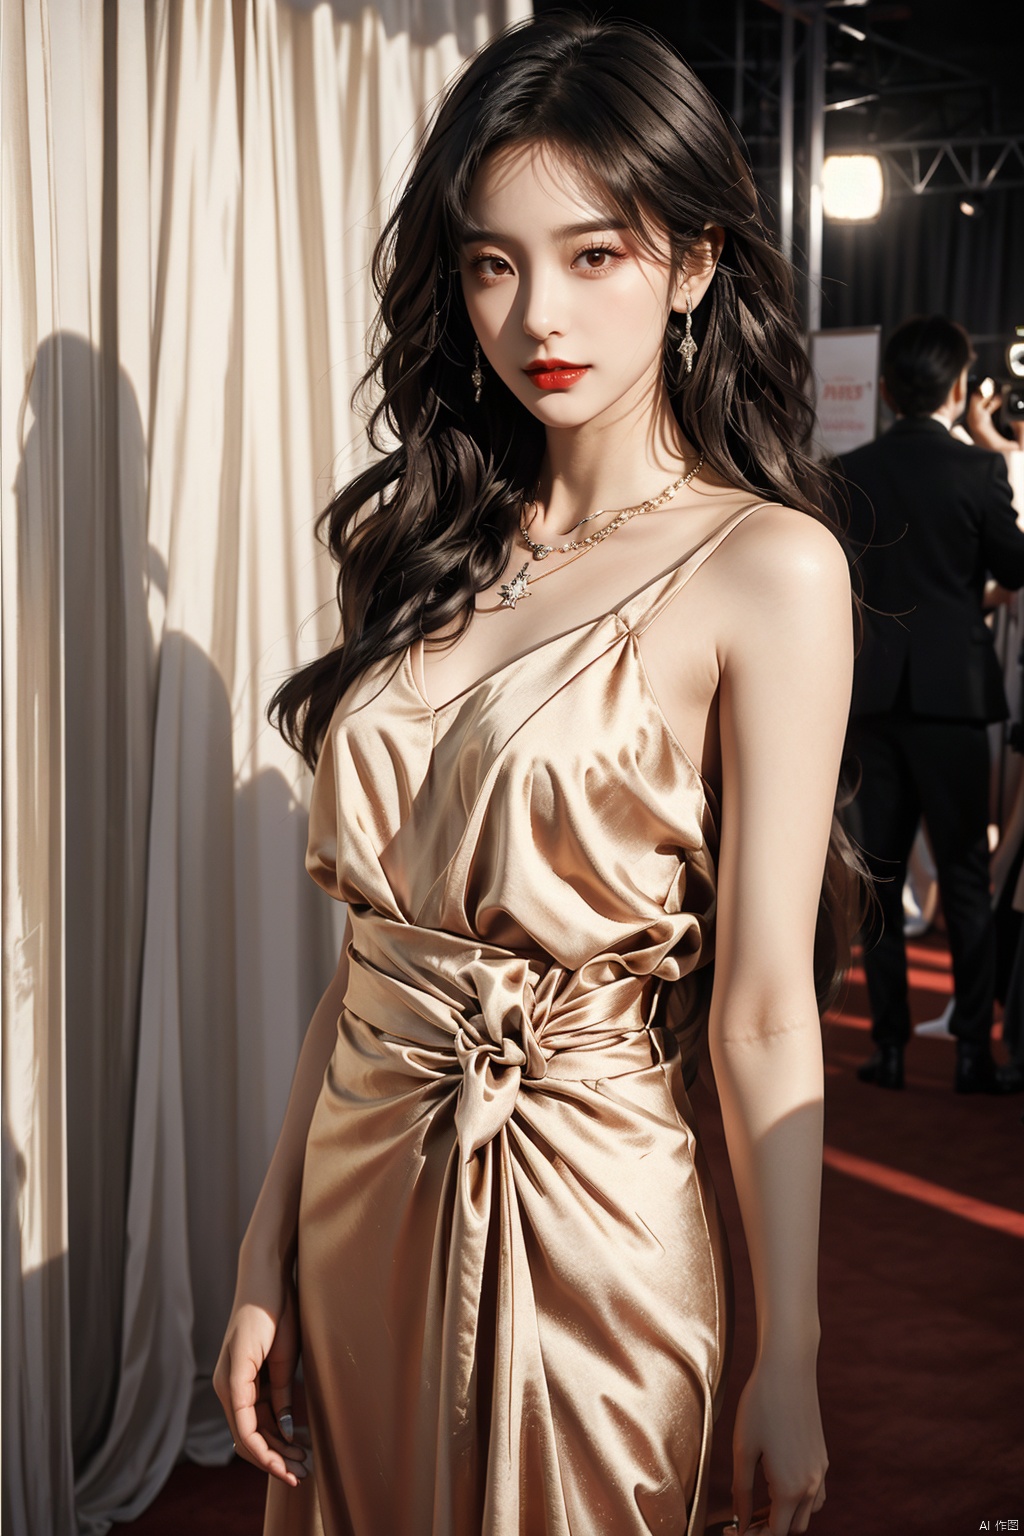  1 Female star, actress, (30 years old), glamorous, glamorous, perfect skin, expressive eyes, perfect makeup, red carpet look, shirt, slacks, (Diamond necklace :1.2), heels, red lipstick, (long flowing hair :1.1), stylish hairstyle, confident smile, posing, paparazzi, flash, Hollywood, Awards shows, Celebrity status, iconic, talented, versatile actress, (Cinematography Beauty :1.3), red carpet events, glamorous lifestyle, celebrity fashion, Influence, red carpet moments, red carpet fashion, Photogenic, (enviable body :1.2), red carpet poses, A-listers, Red carpet glamour, Celebrity Status, Fashion cutting edge, (Fashion icon :1.2), Fashion accessory, red carpet elegance, red carpet trendsetter.Wumag